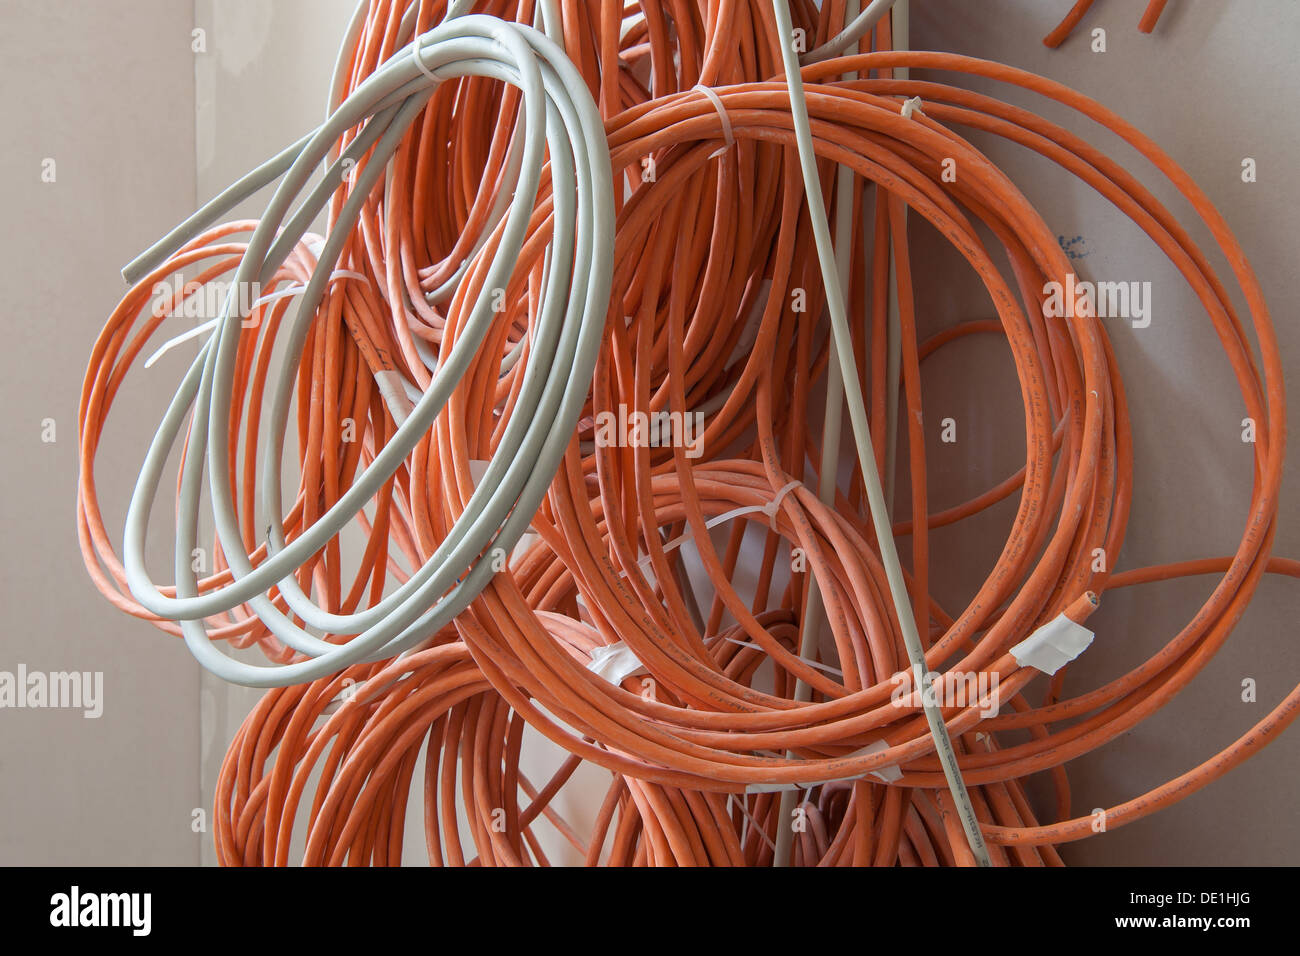 Berlin, Germany, multipolar cables hanging on a wall Stock Photo